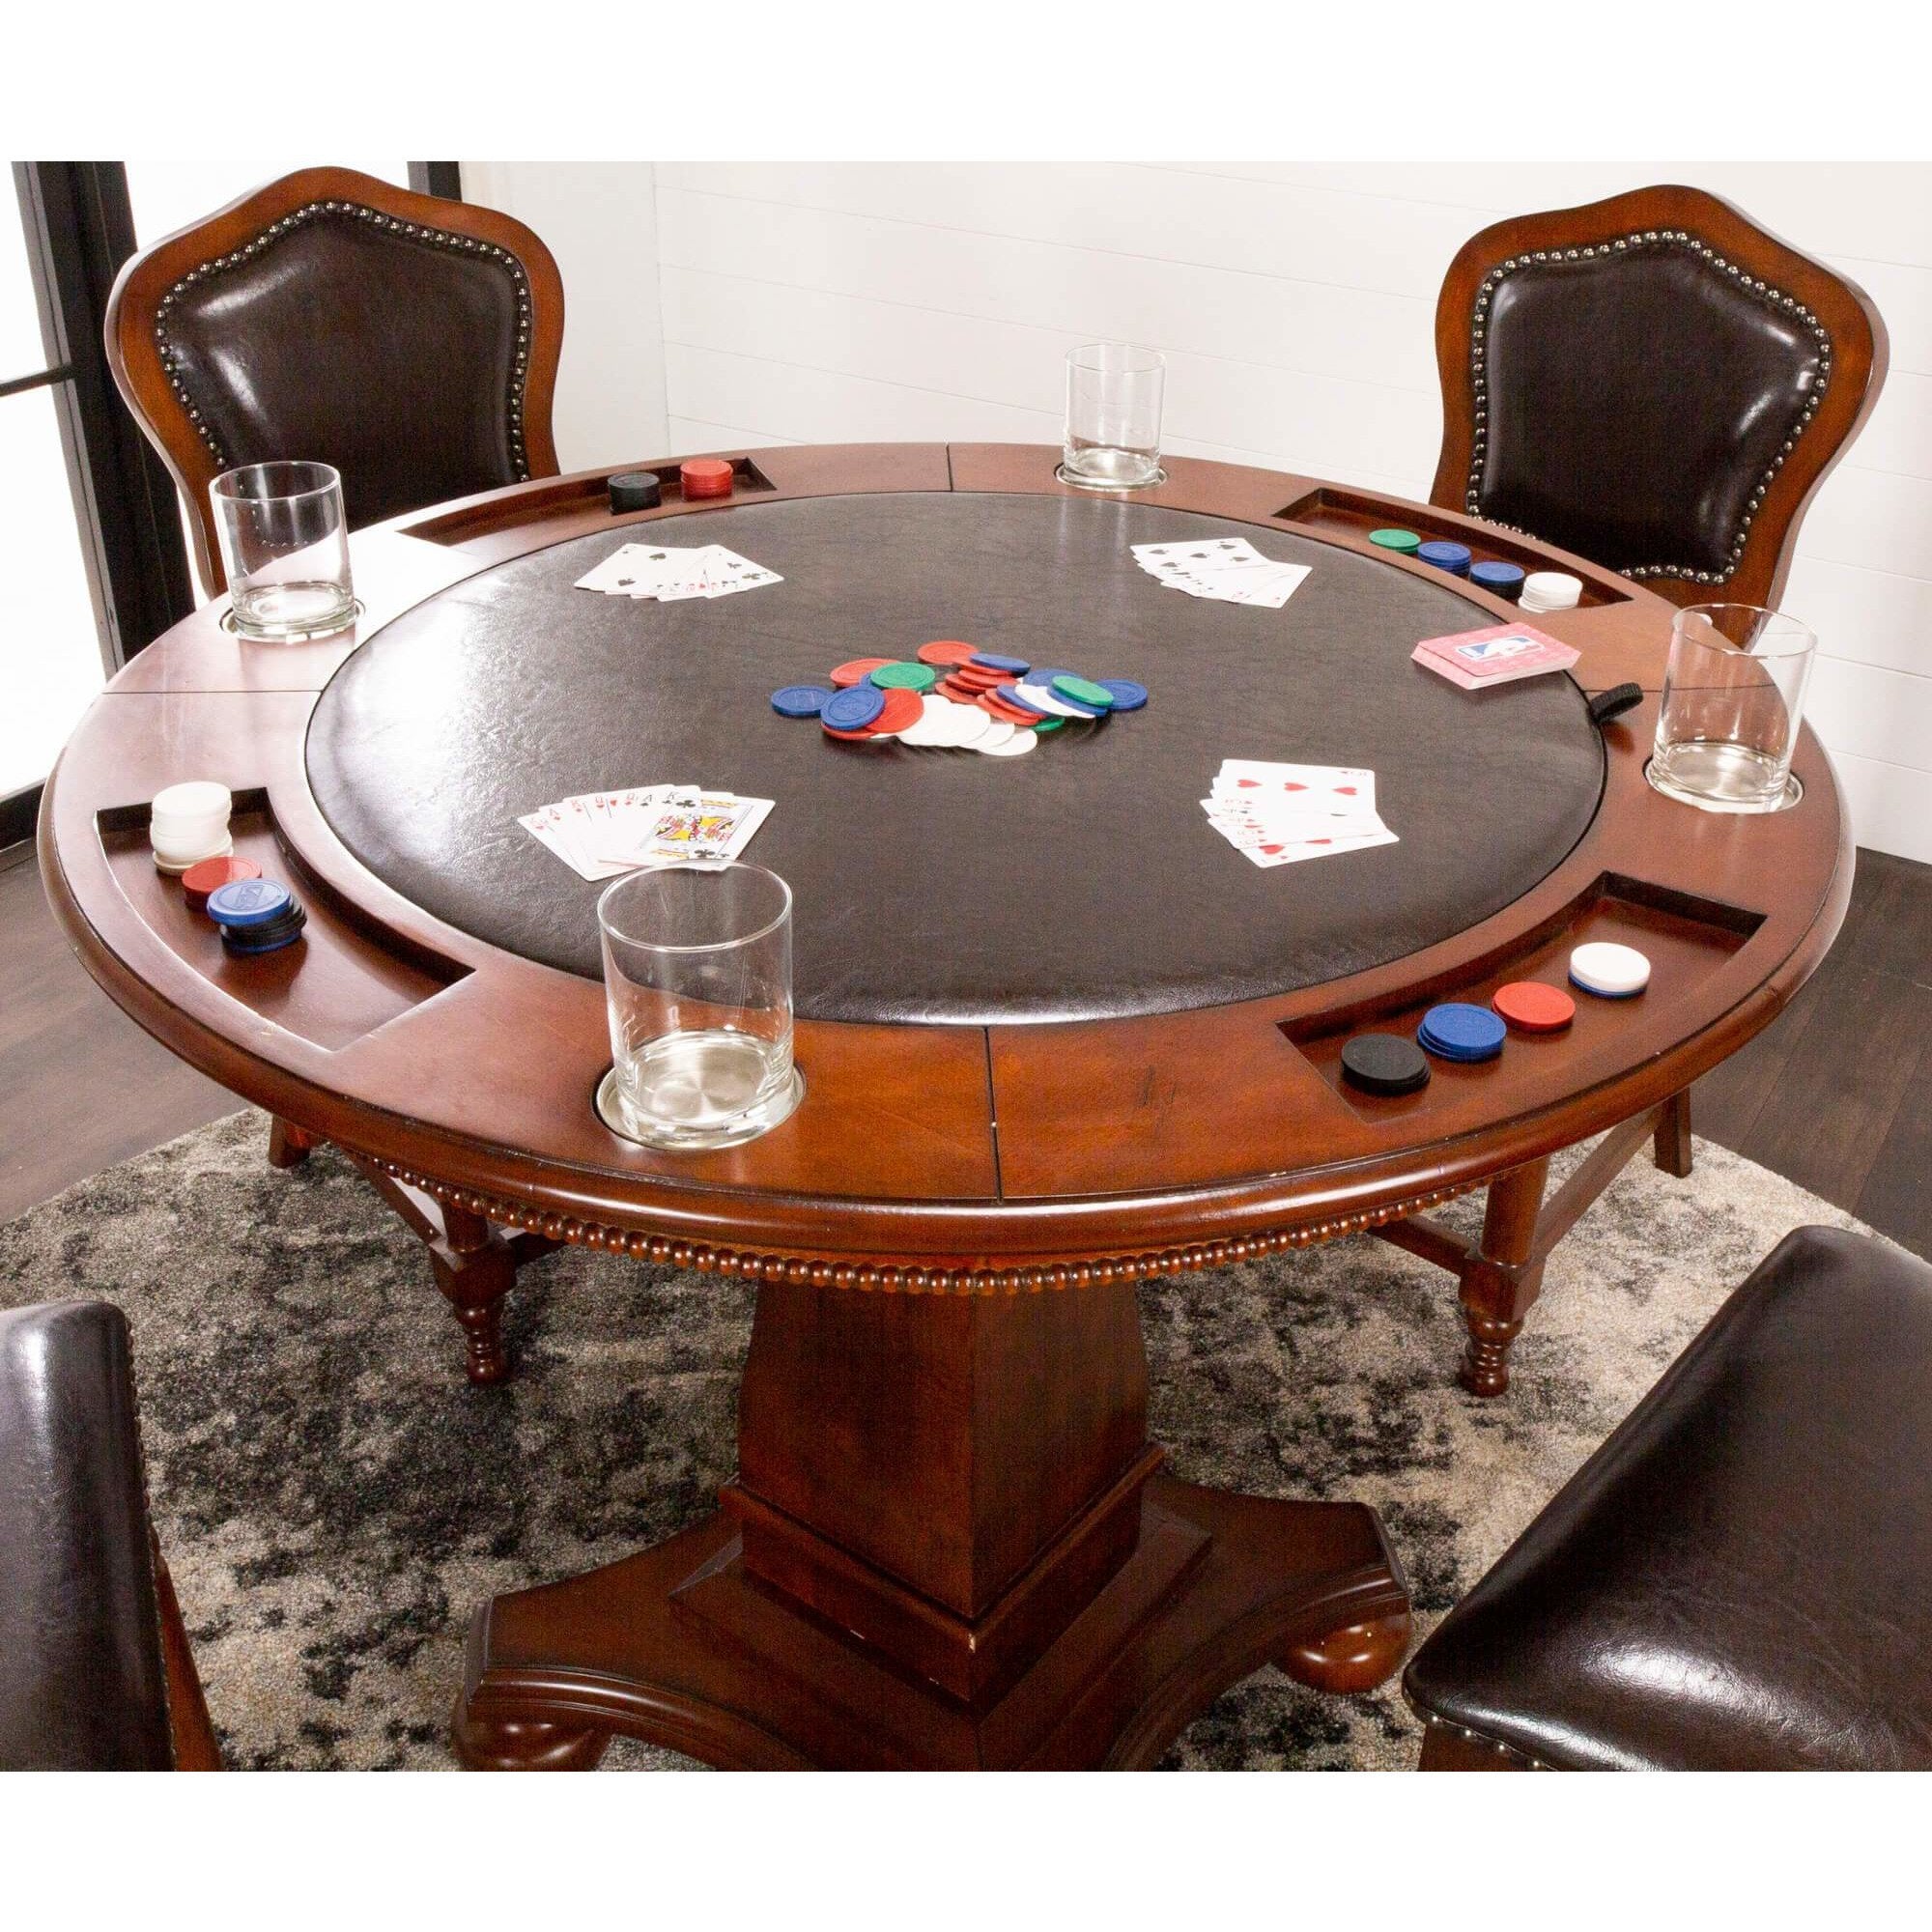 sunset trading bellagio 42 round 3in1 table cr-87148-tcb poker table setup